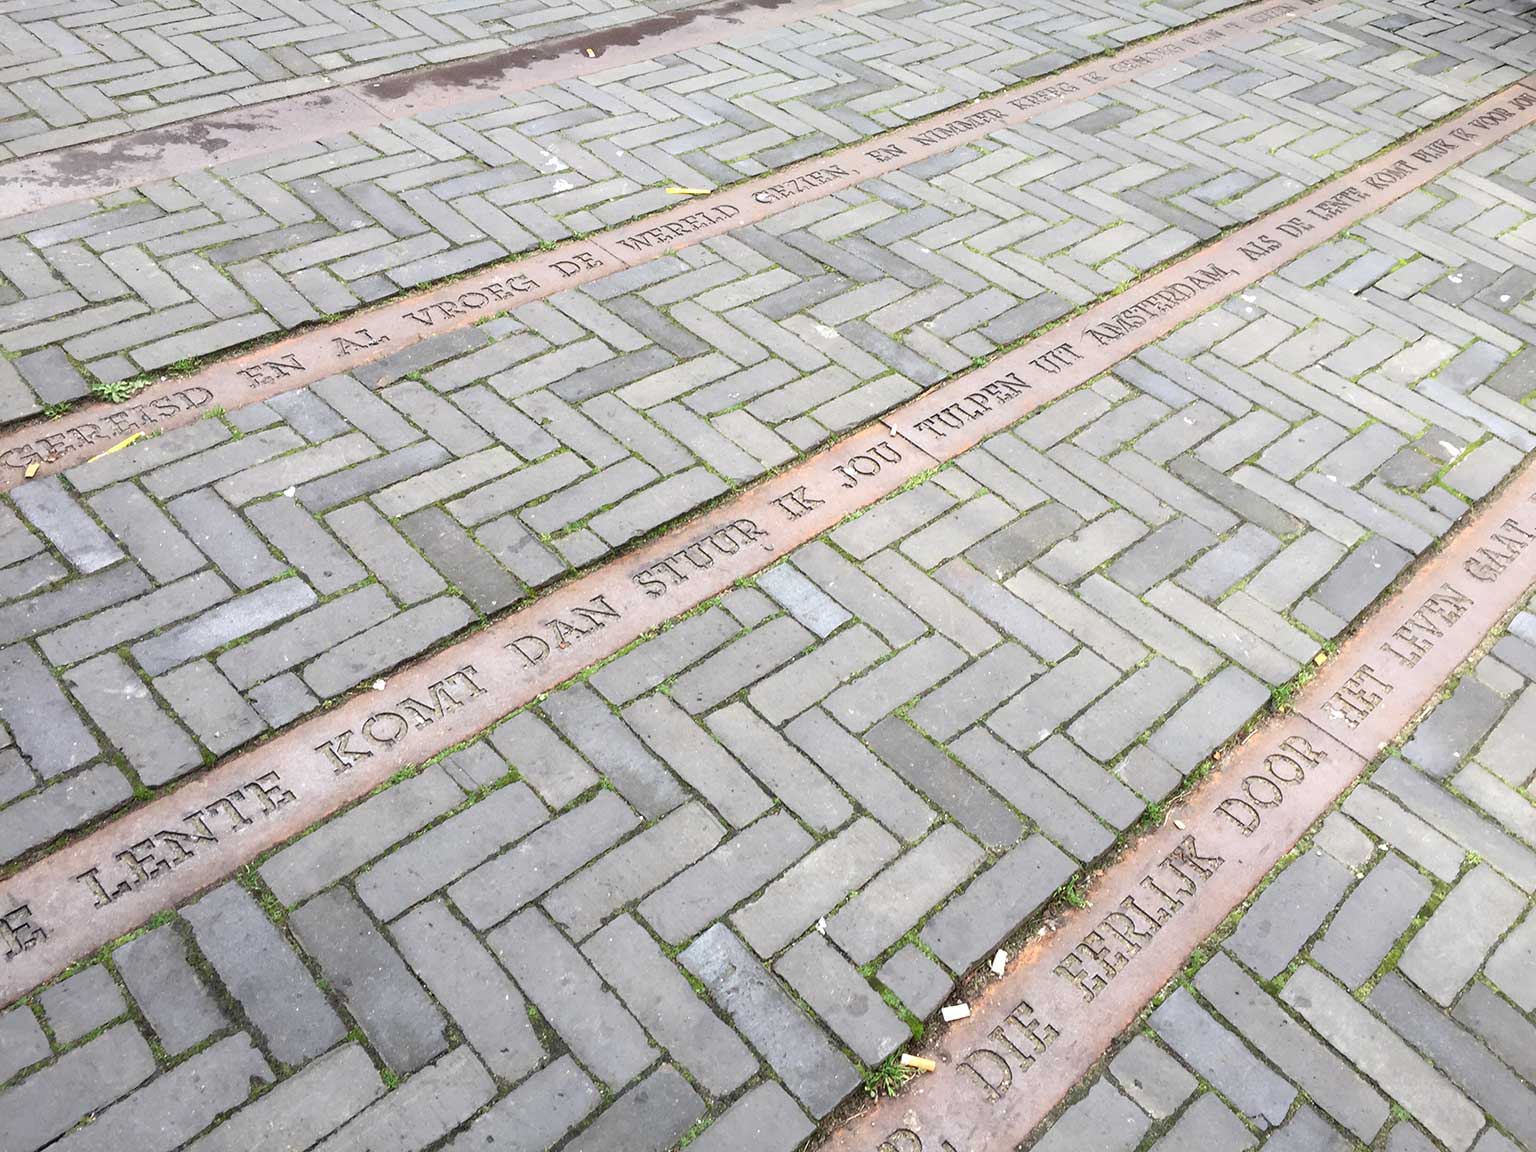 Metal strips with song lyrics in the pavement of the Elandsgracht, Amsterdam